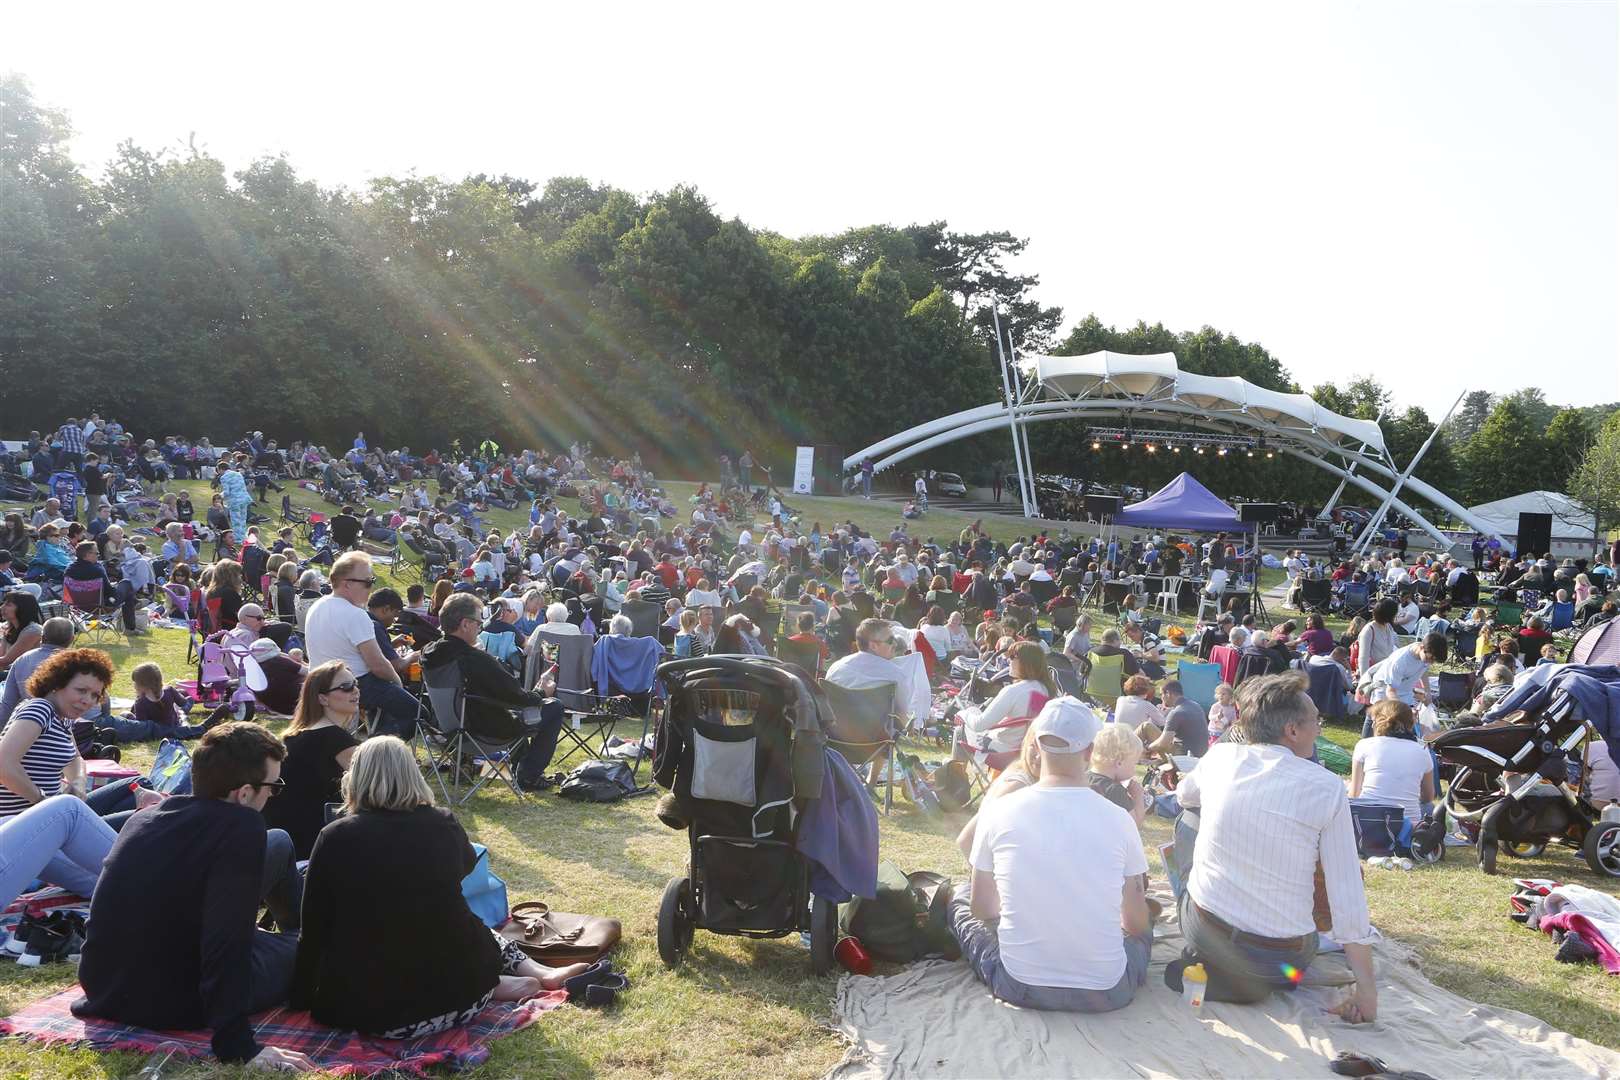 Music from the Riverside Stage at Whatman Park